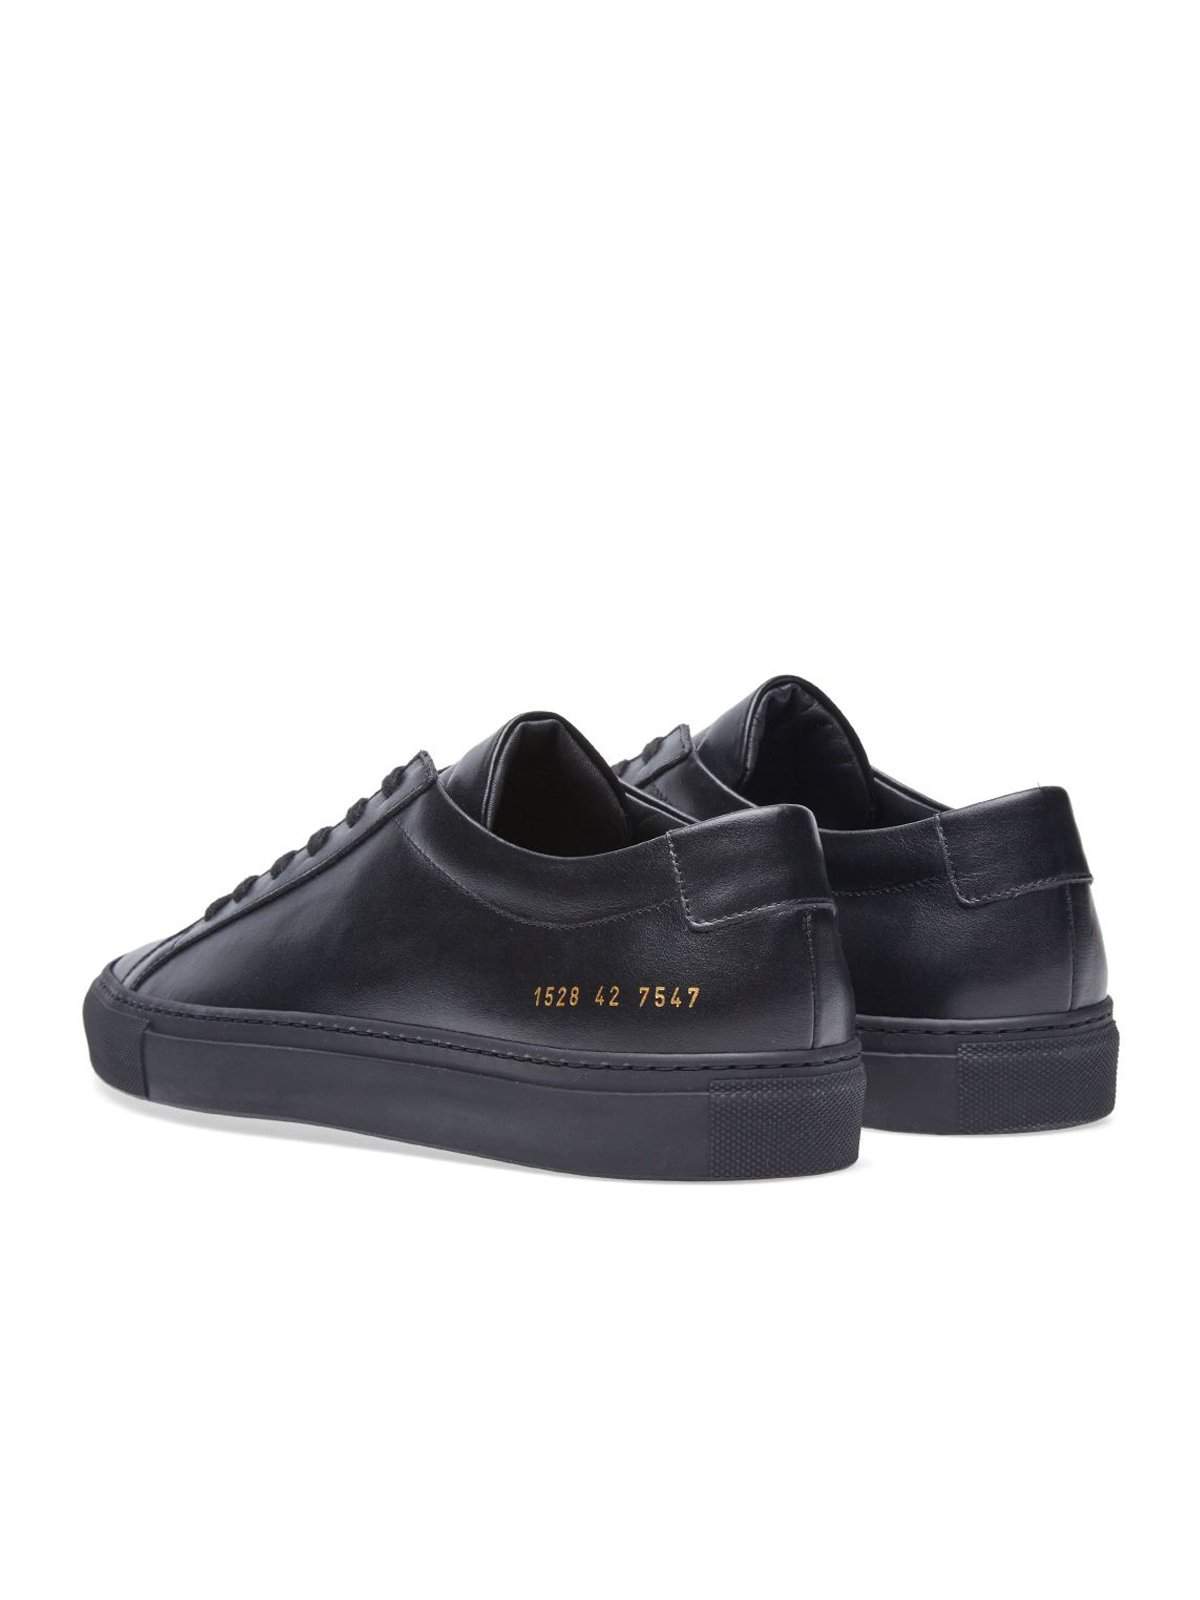 Common Projects Original Achilles Low Black - MORE by Morello Indonesia